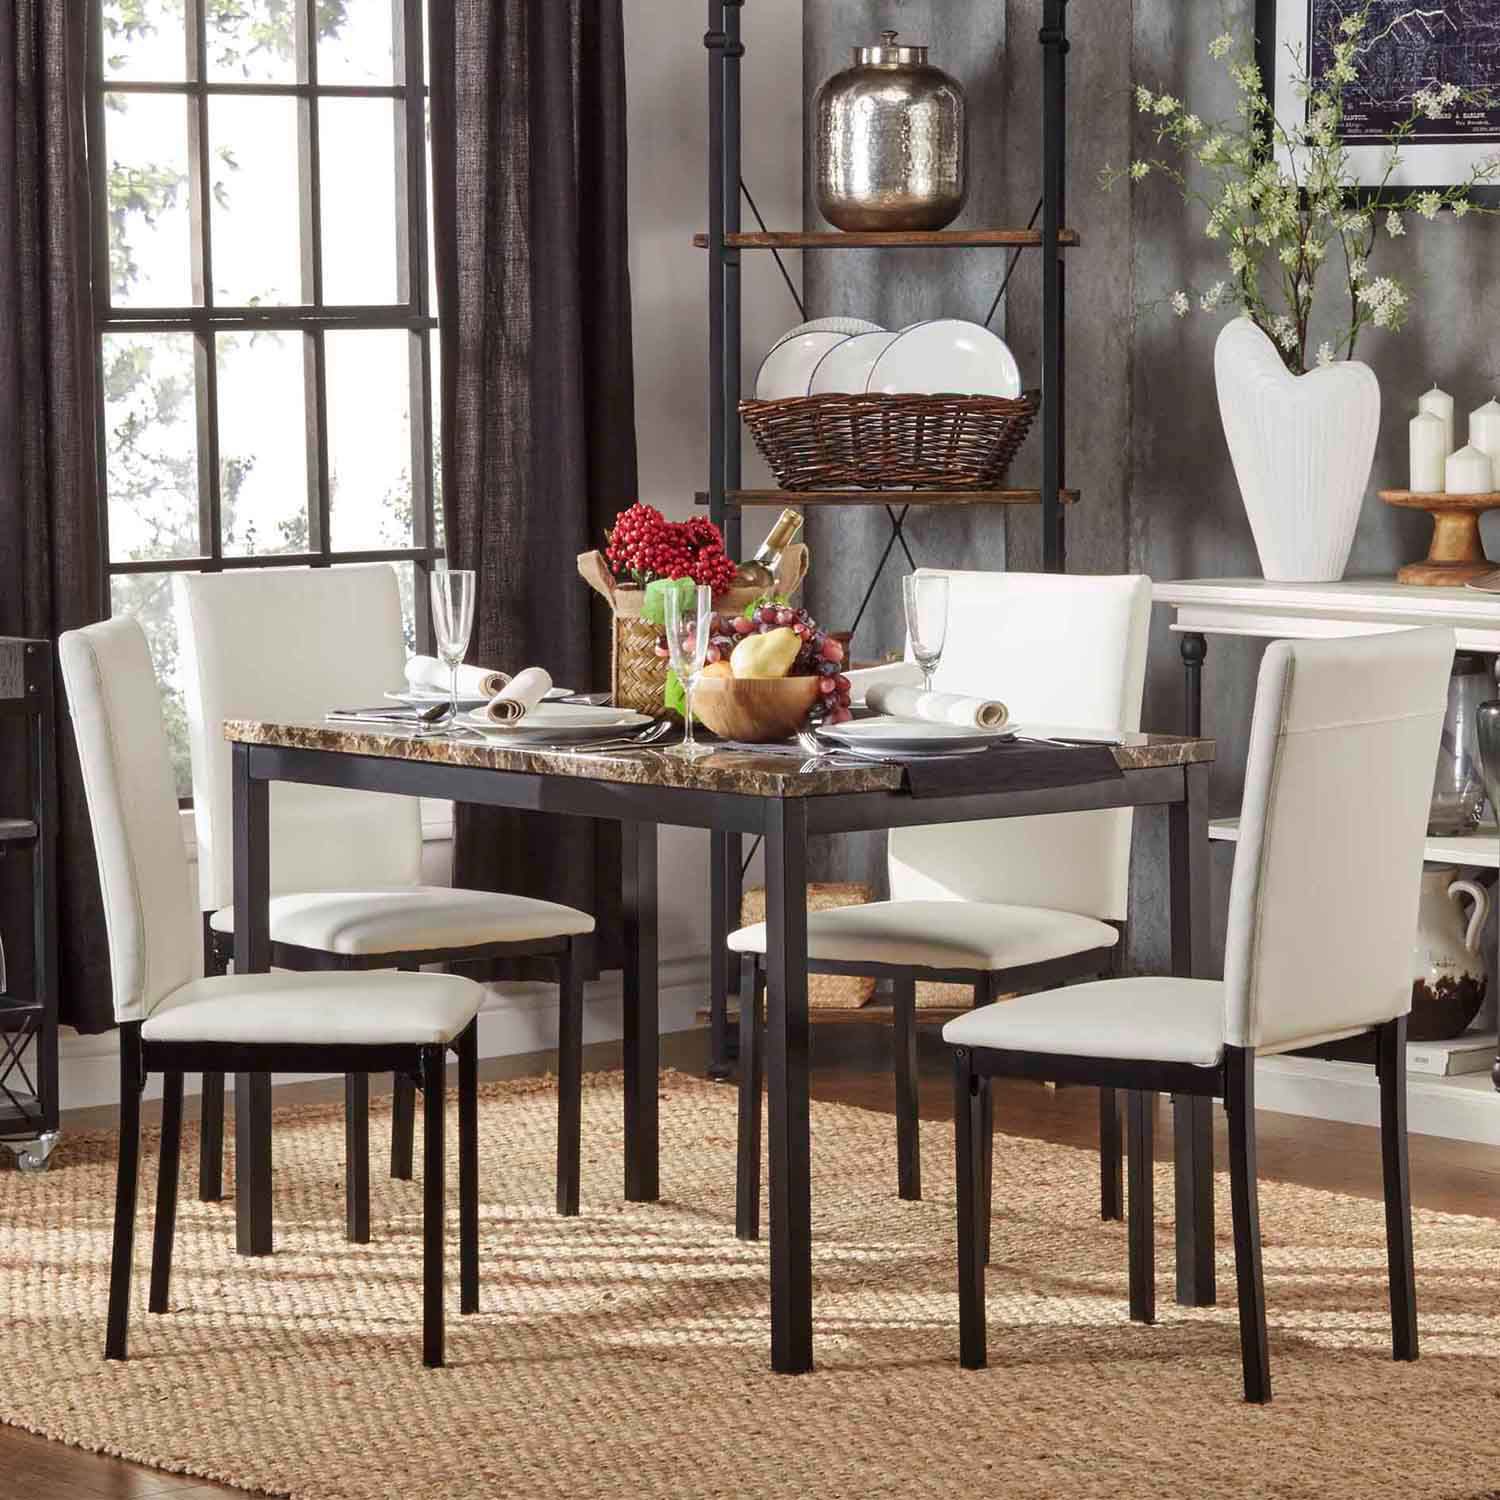 Image for HomeVance Catania Dining Table & Faux-Leather Dining Chair 5-piece Set at Kohl's.